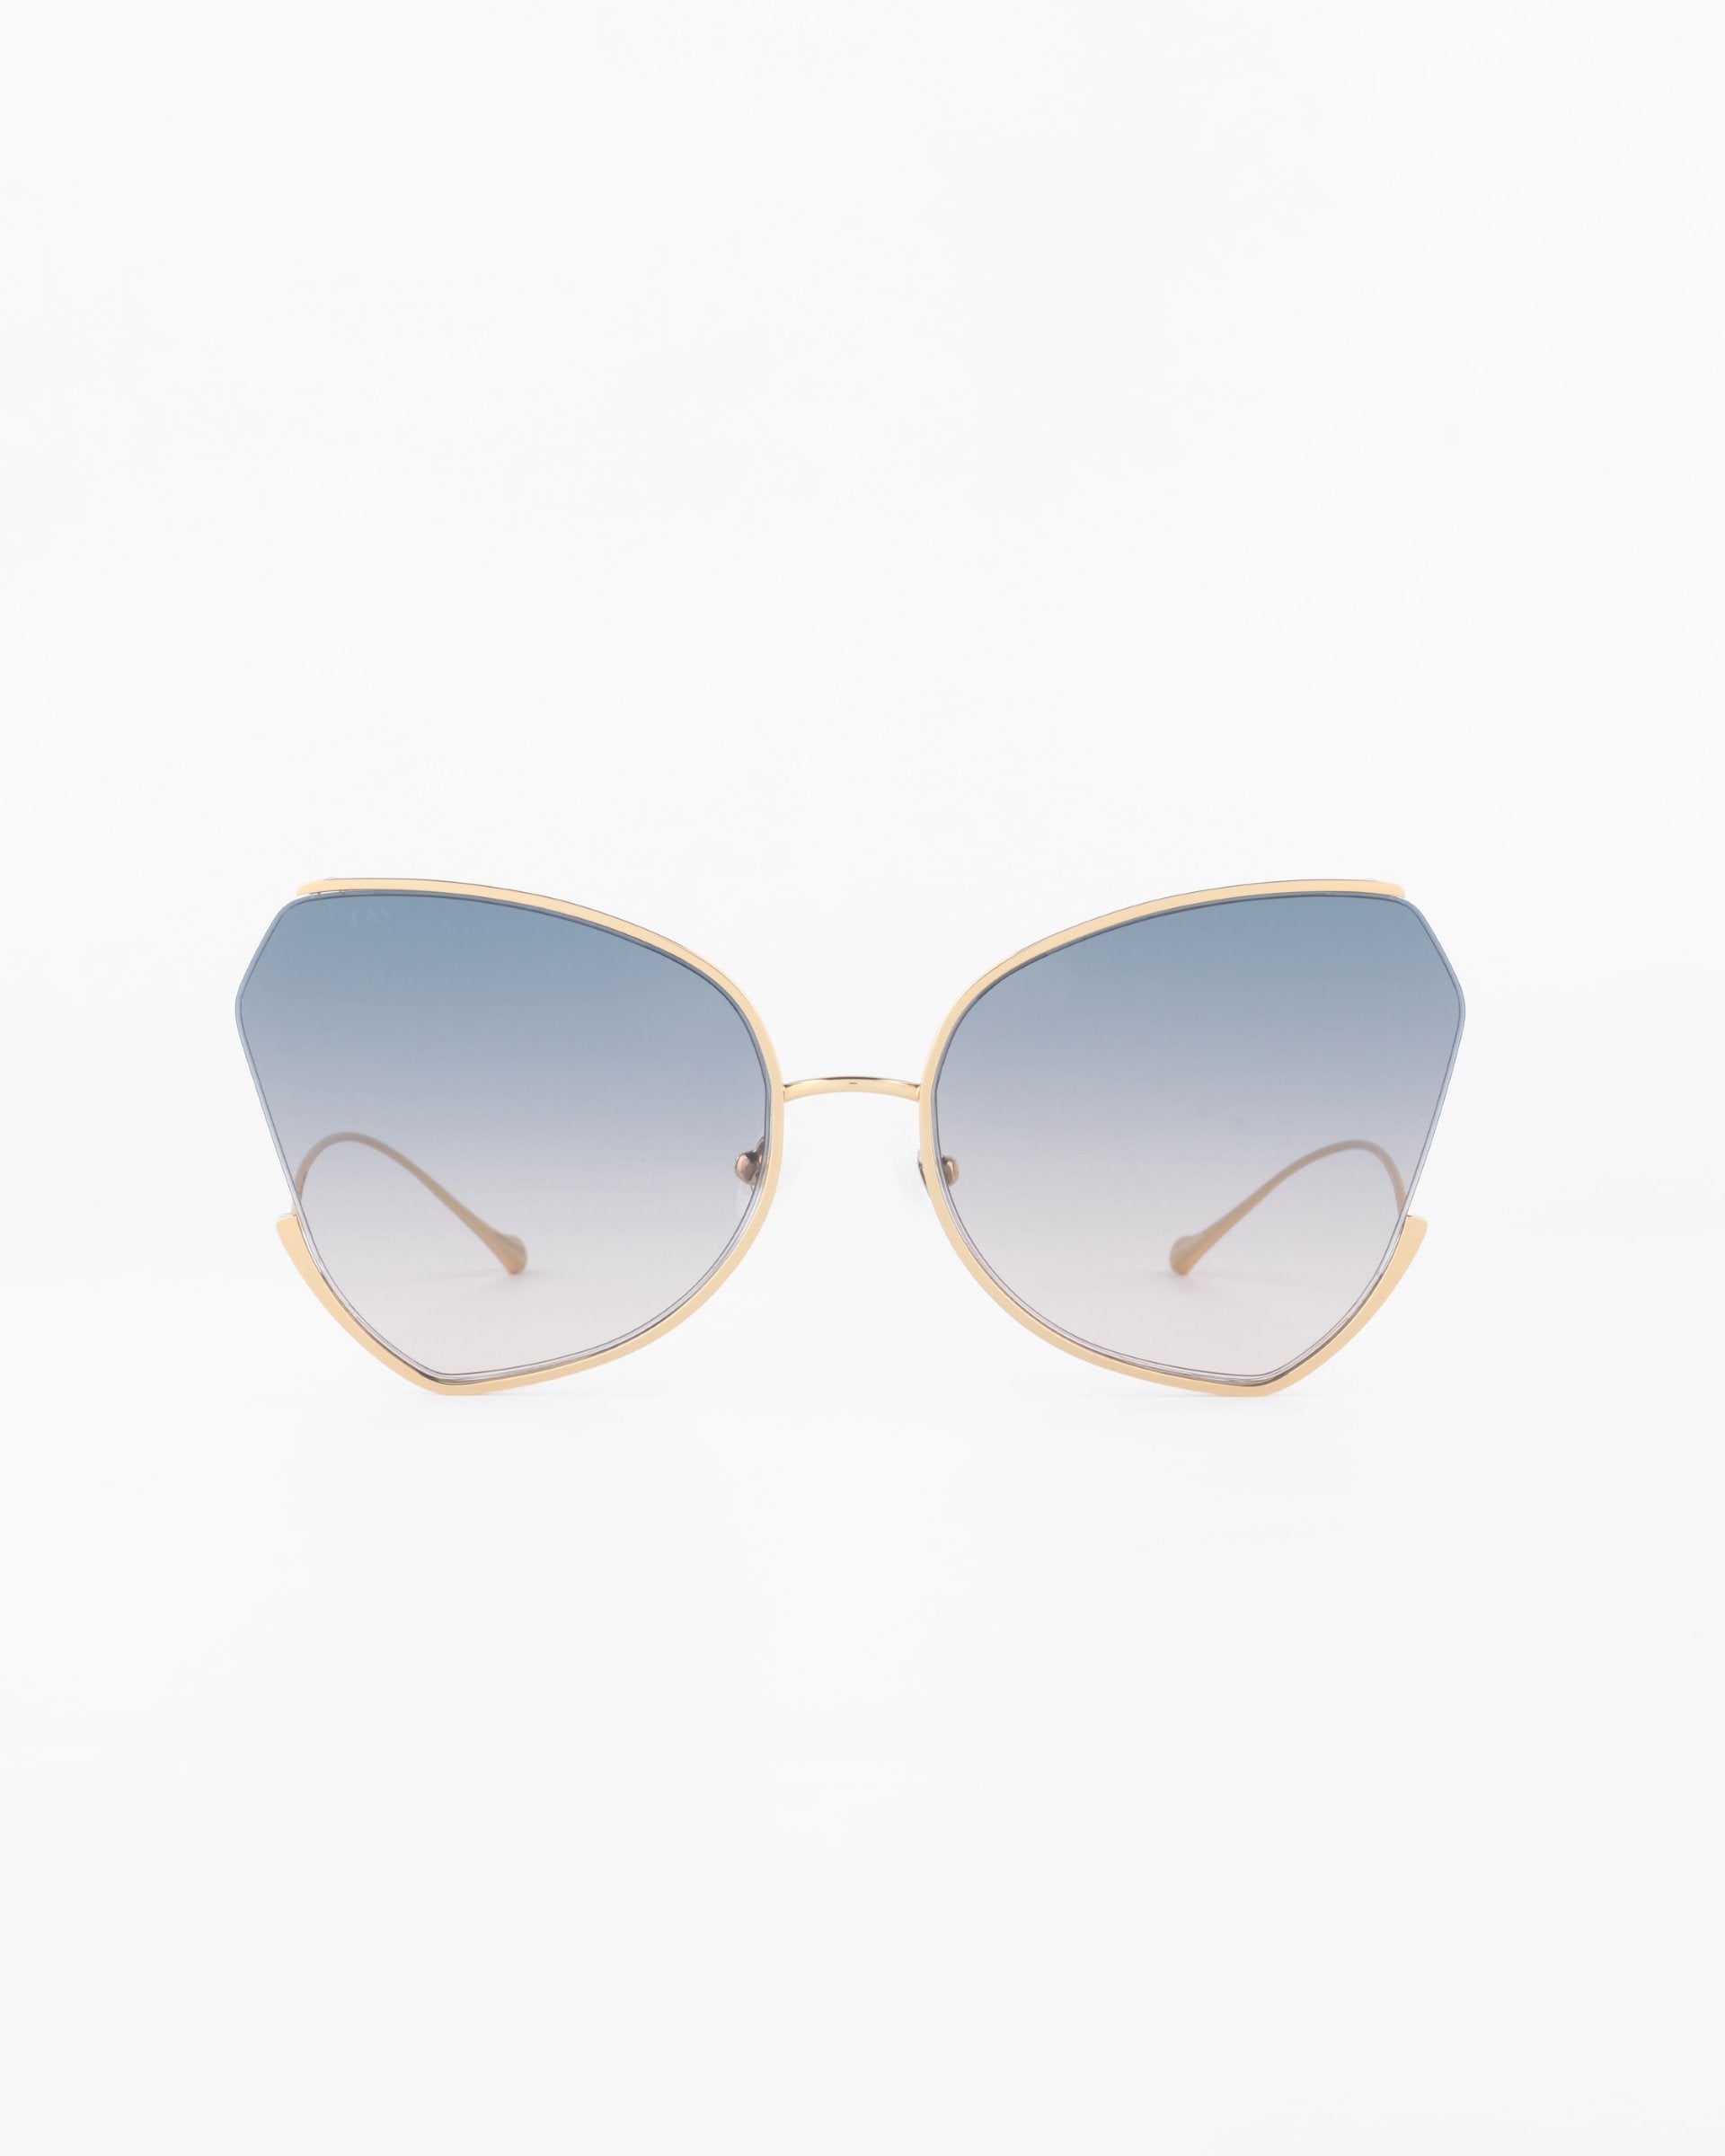 Close-up of a pair of Watercolour sunglasses by For Art's Sake® with gold-plated stainless steel frames and large, gradient blue lenses. The glasses have a sleek, modern design with slightly geometric lenses, offering UV protection. The background is a clean, plain white.